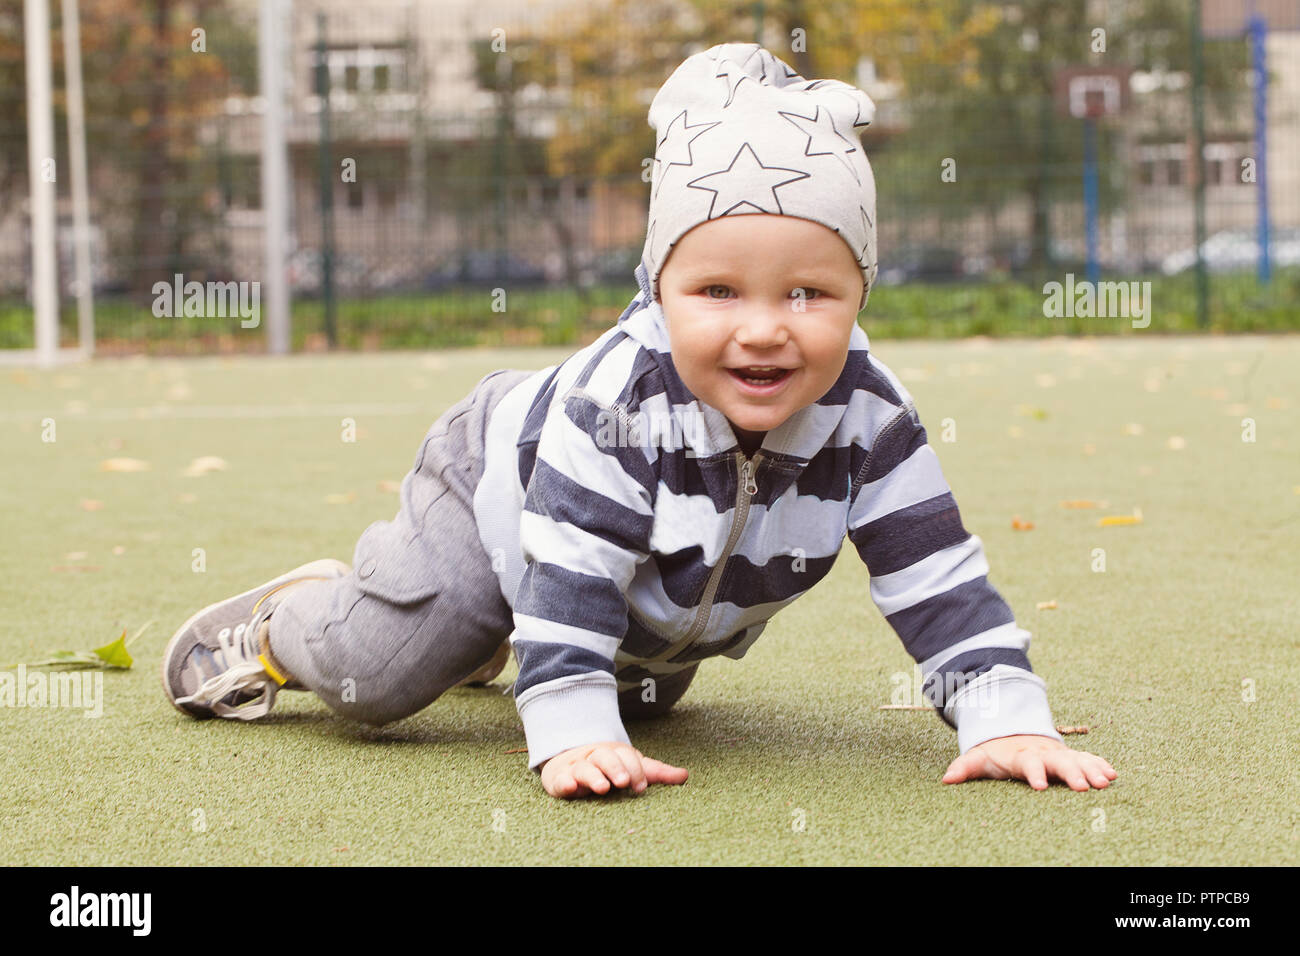 Smiling child playing outdoors, little boy 1-2 years old Stock Photo